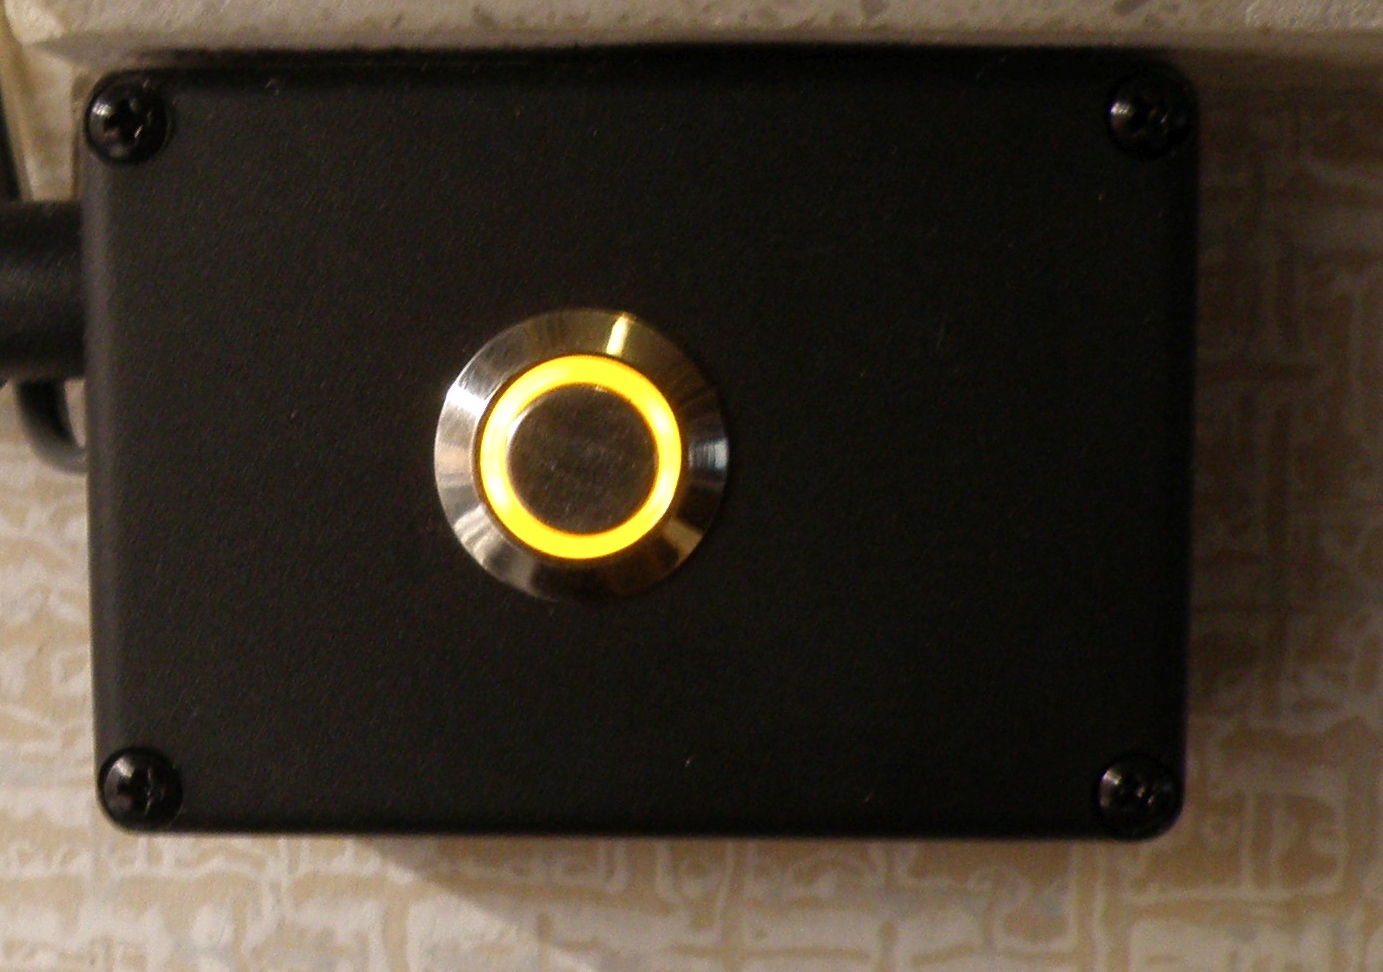 Finished enclosure front with iluminated button